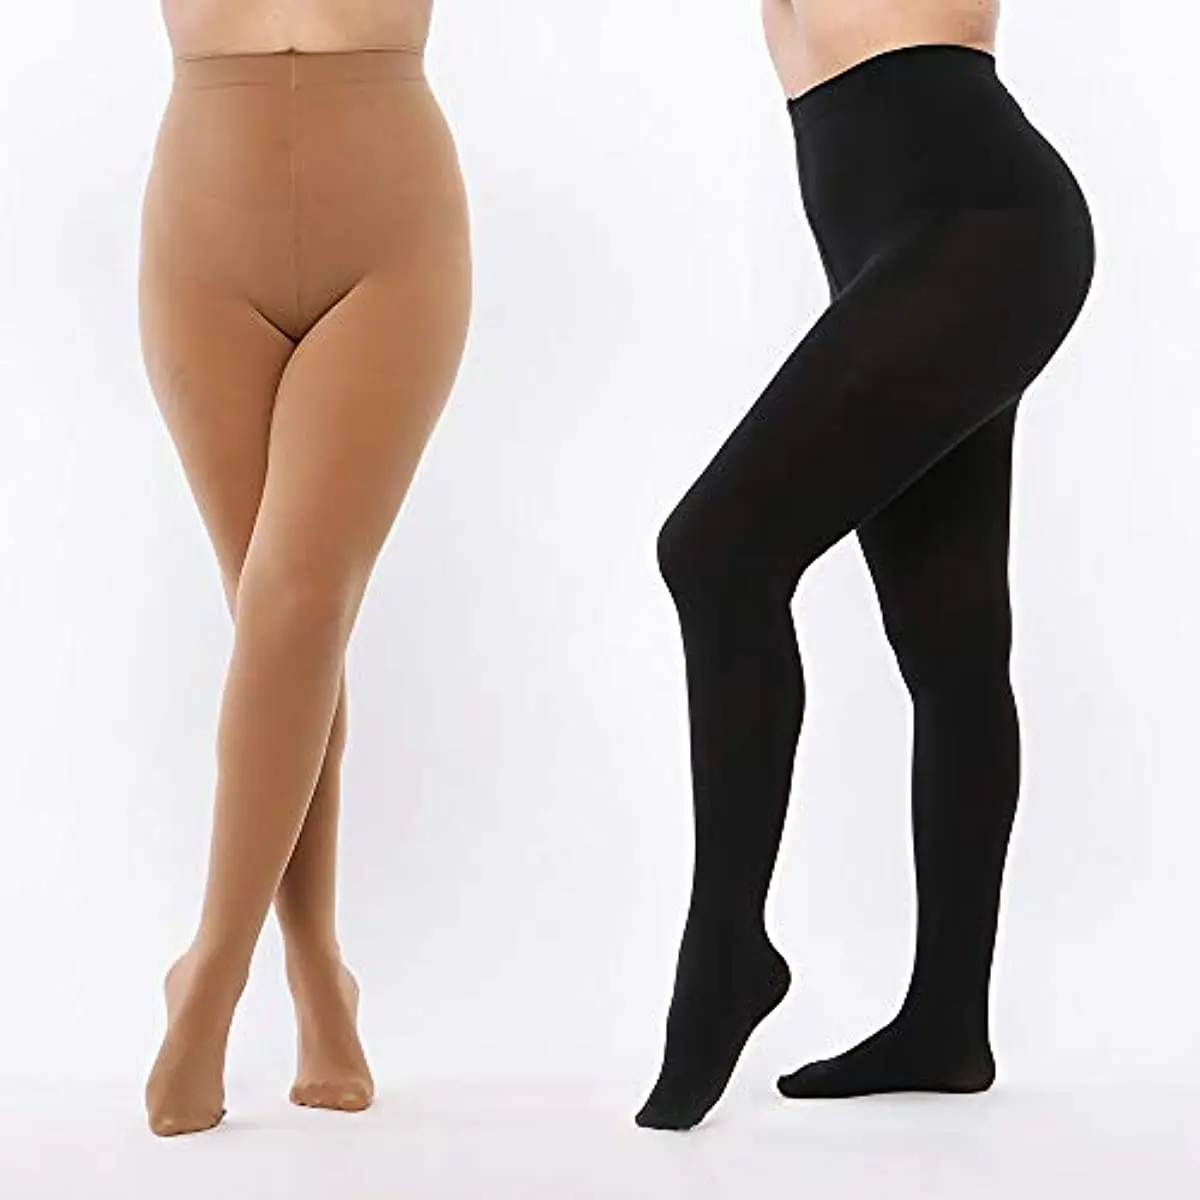 Plus Size Opaque Tights Control Top Pantyhose High Waist Tights for Women Compression Stockings Pantyhose Women 15-20mmHg